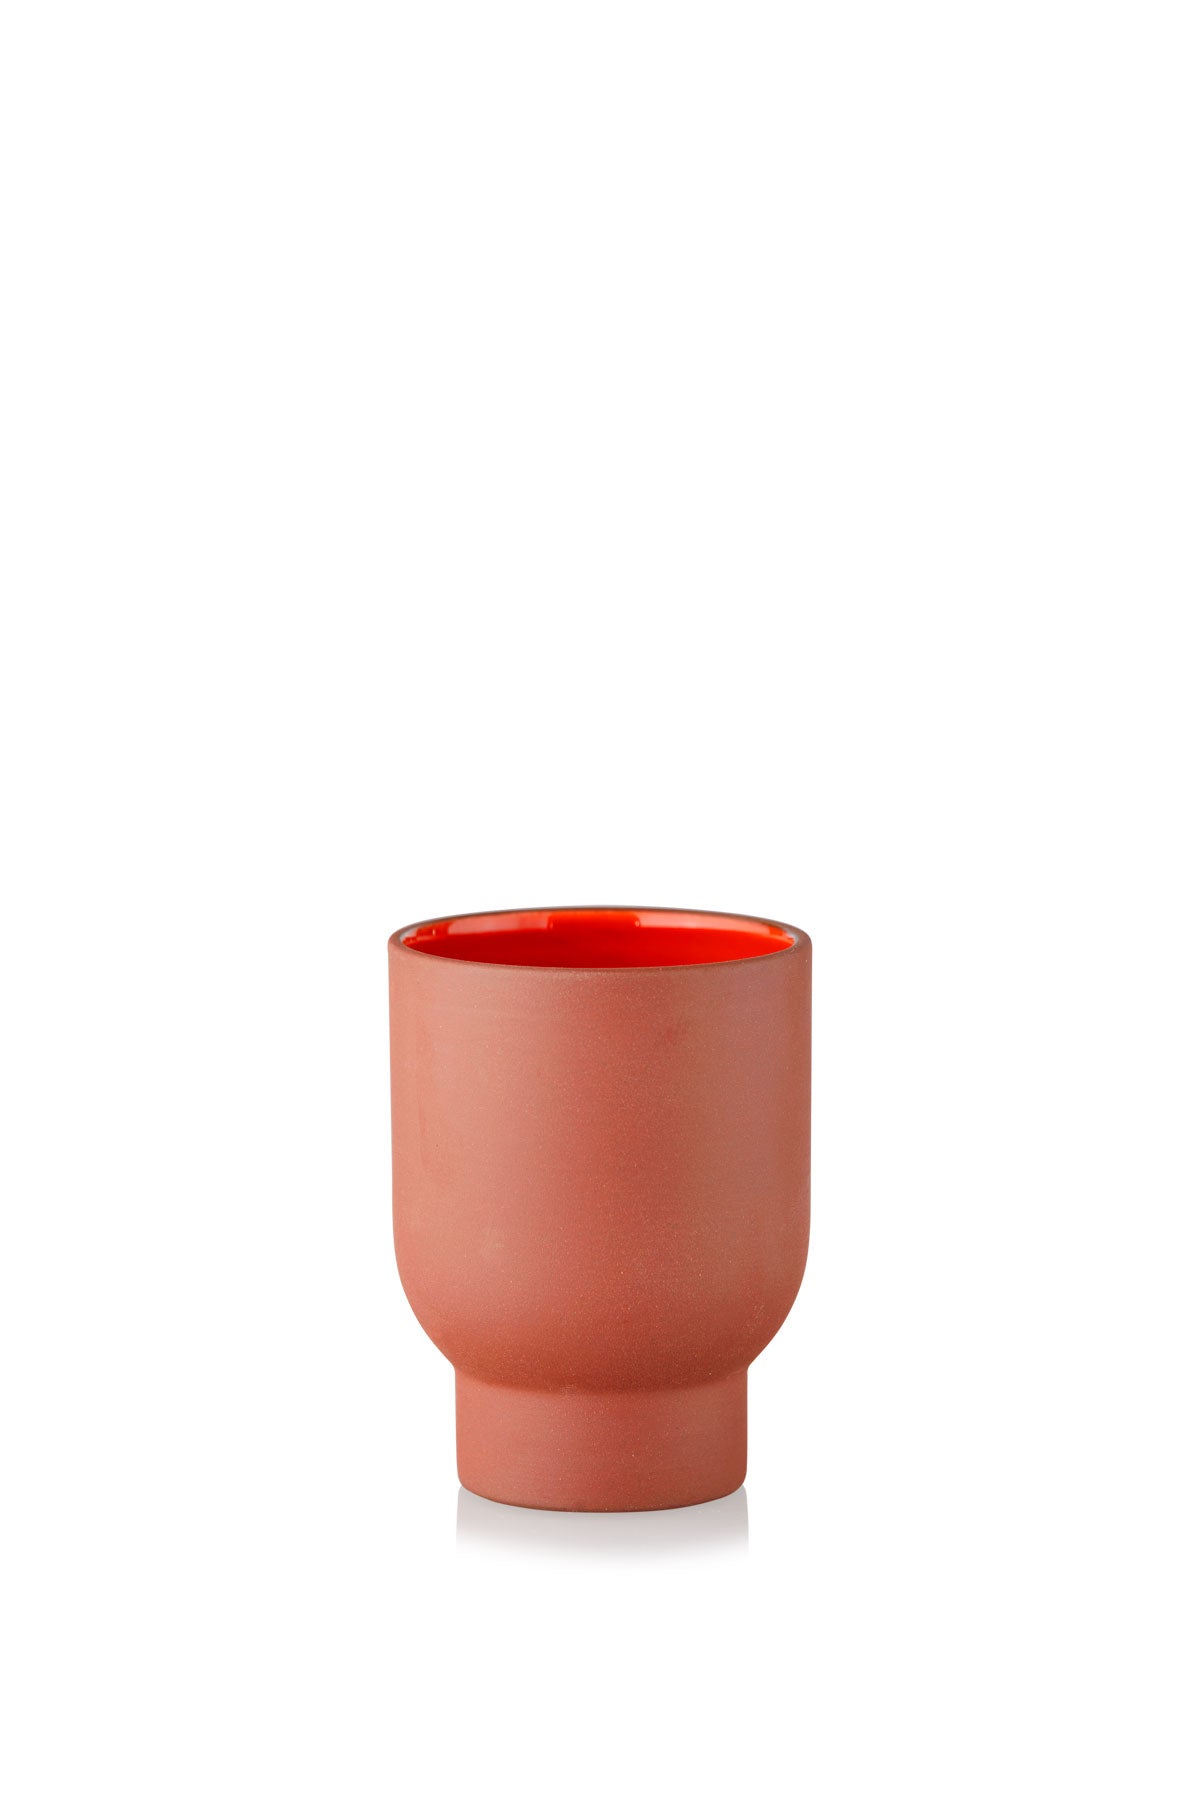 CLAYWARE, CUP, TALL, 2 STK, TERRACOTTA/RED